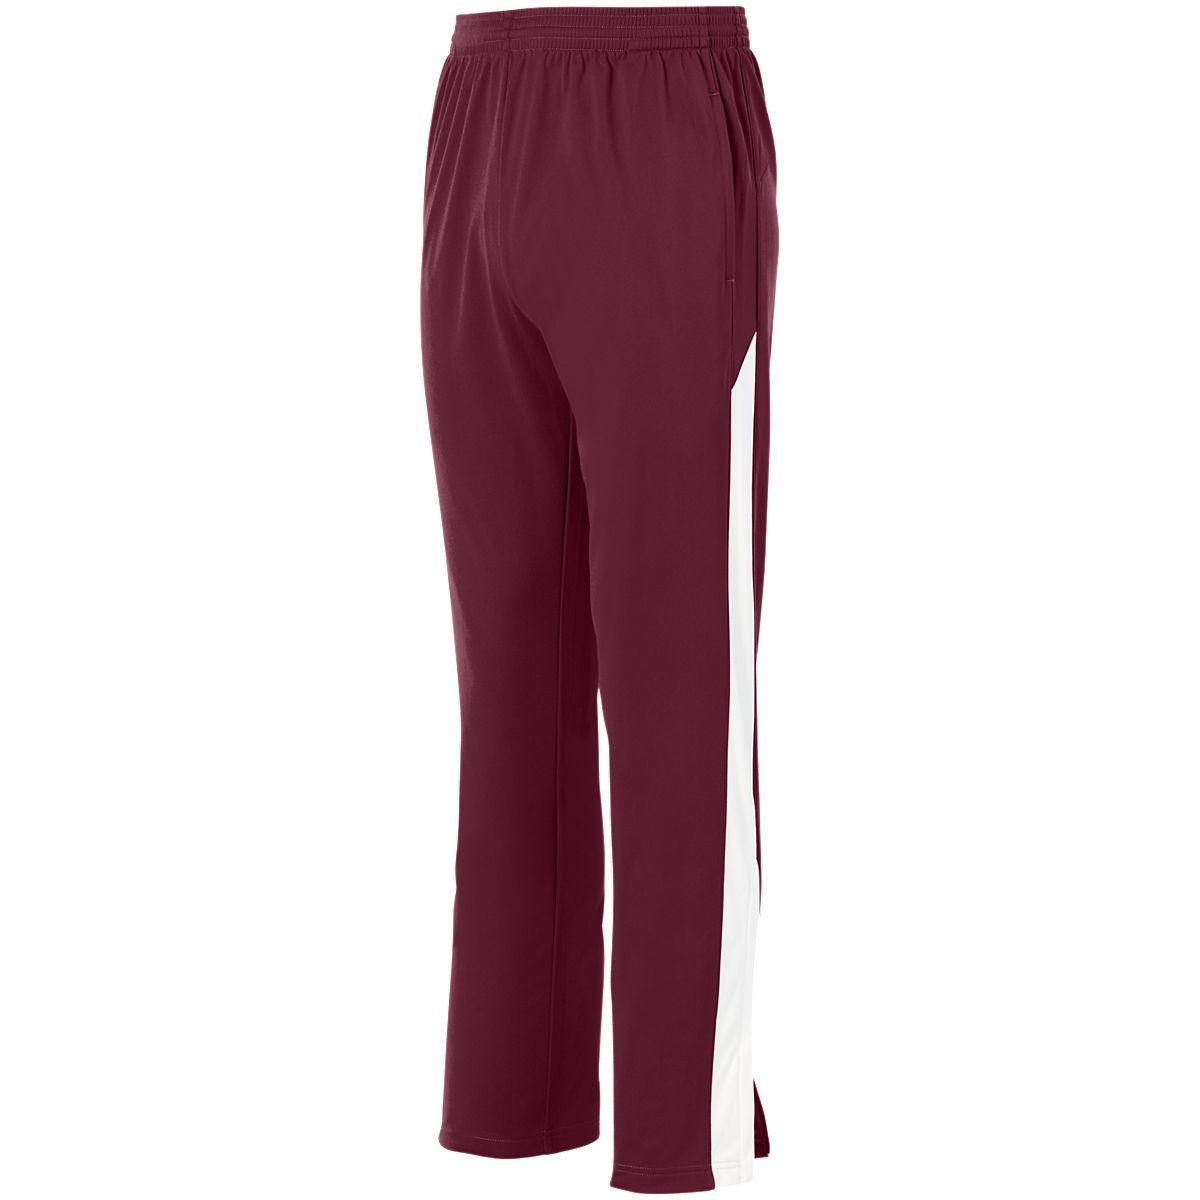 Augusta Sportswear Youth Medalist Pant 2.0 in Maroon/White  -Part of the Youth, Youth-Pants, Pants, Augusta-Products product lines at KanaleyCreations.com